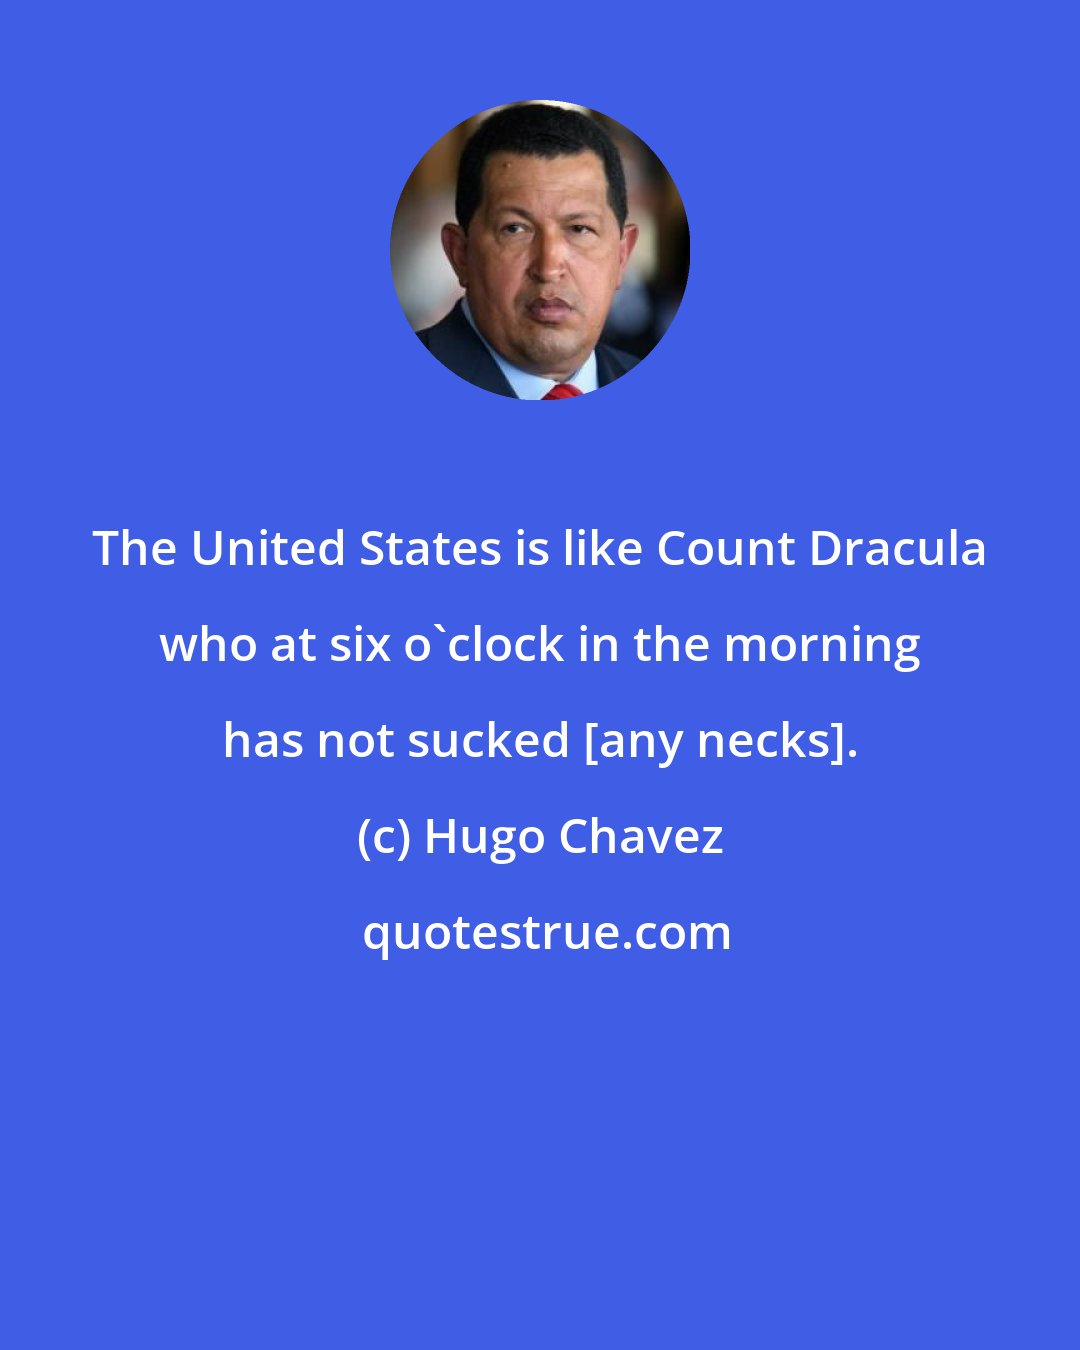 Hugo Chavez: The United States is like Count Dracula who at six o'clock in the morning has not sucked [any necks].